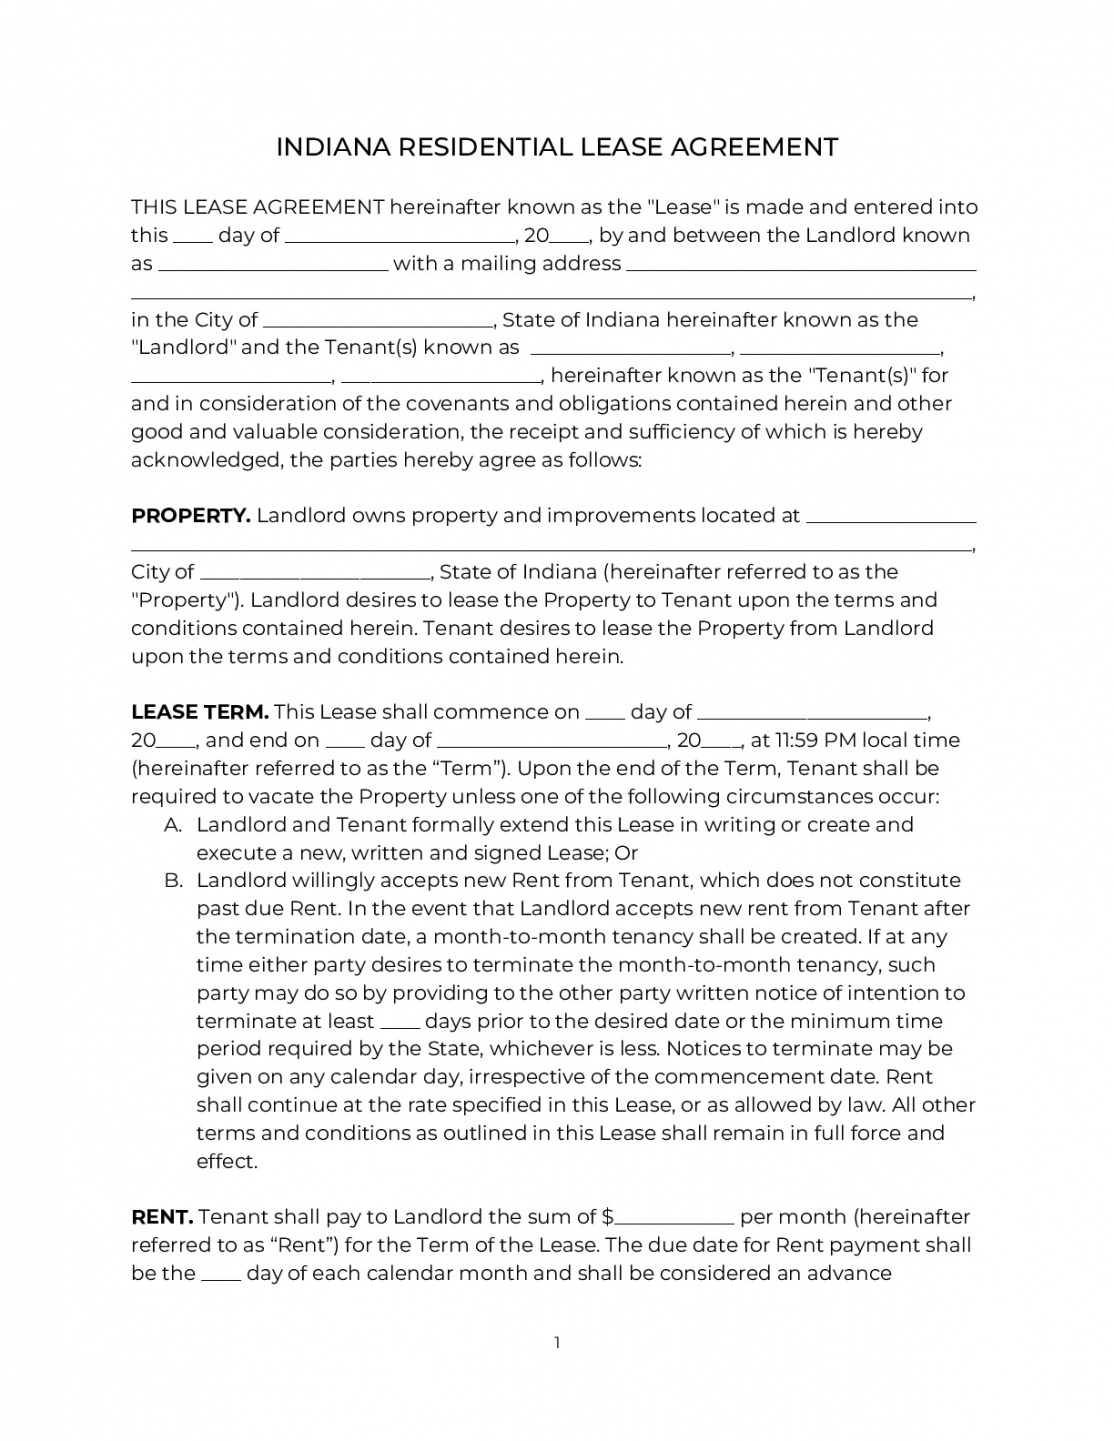 printable indiana residential lease agreement 2020 pdf &amp;amp; word apartment rental agreement template word doc